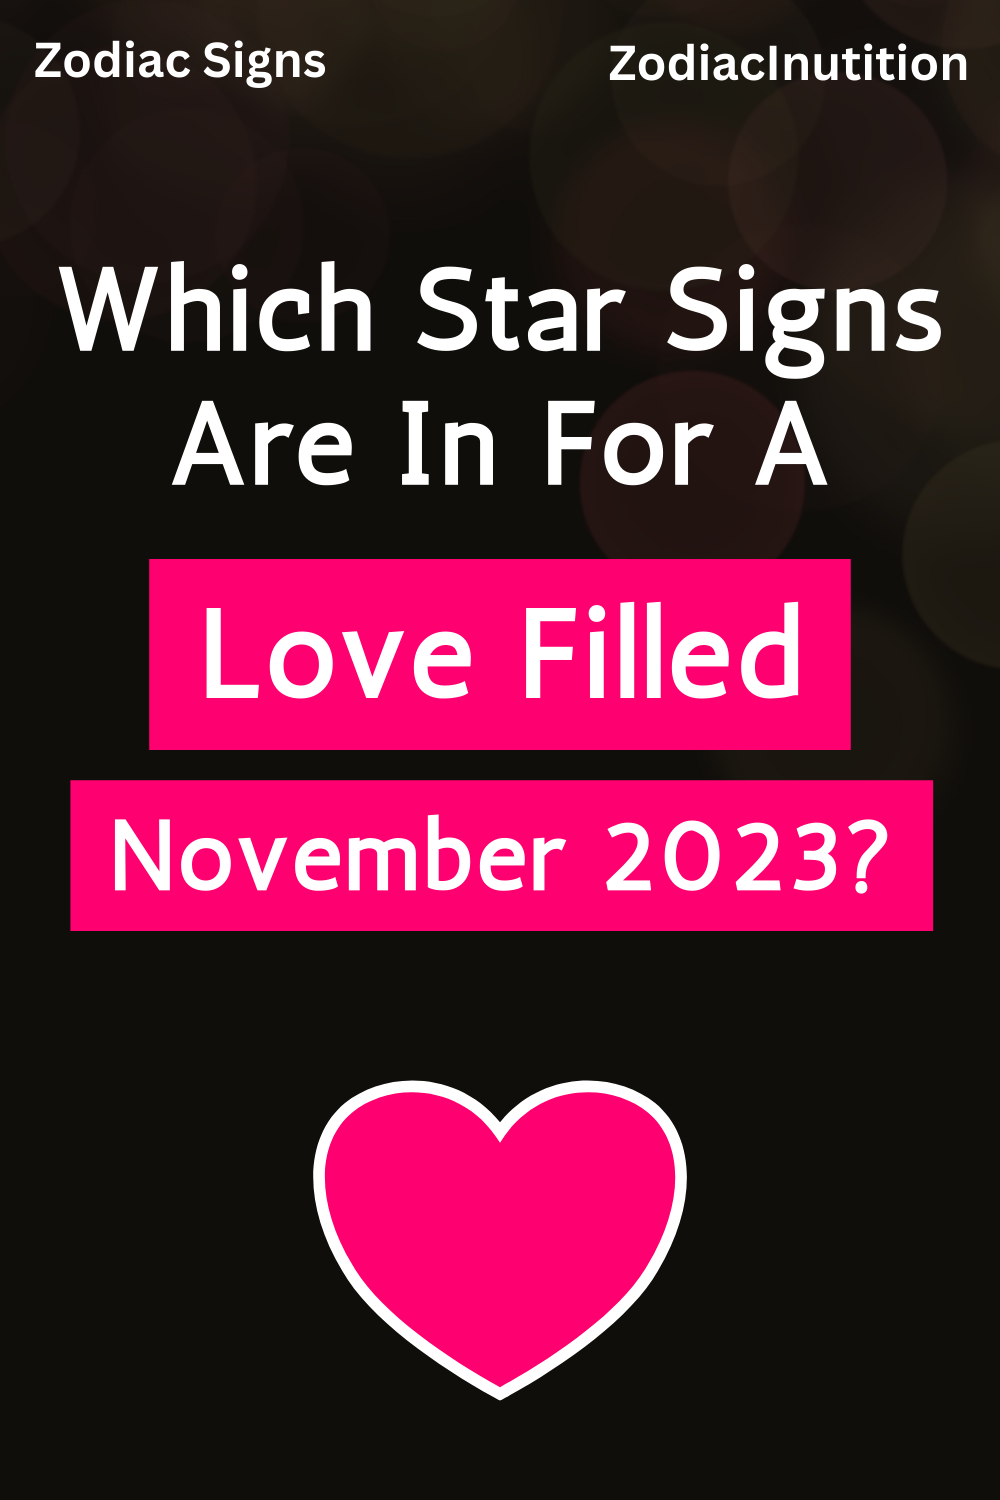 Which Star Signs Are In For A Love Filled November 2023?